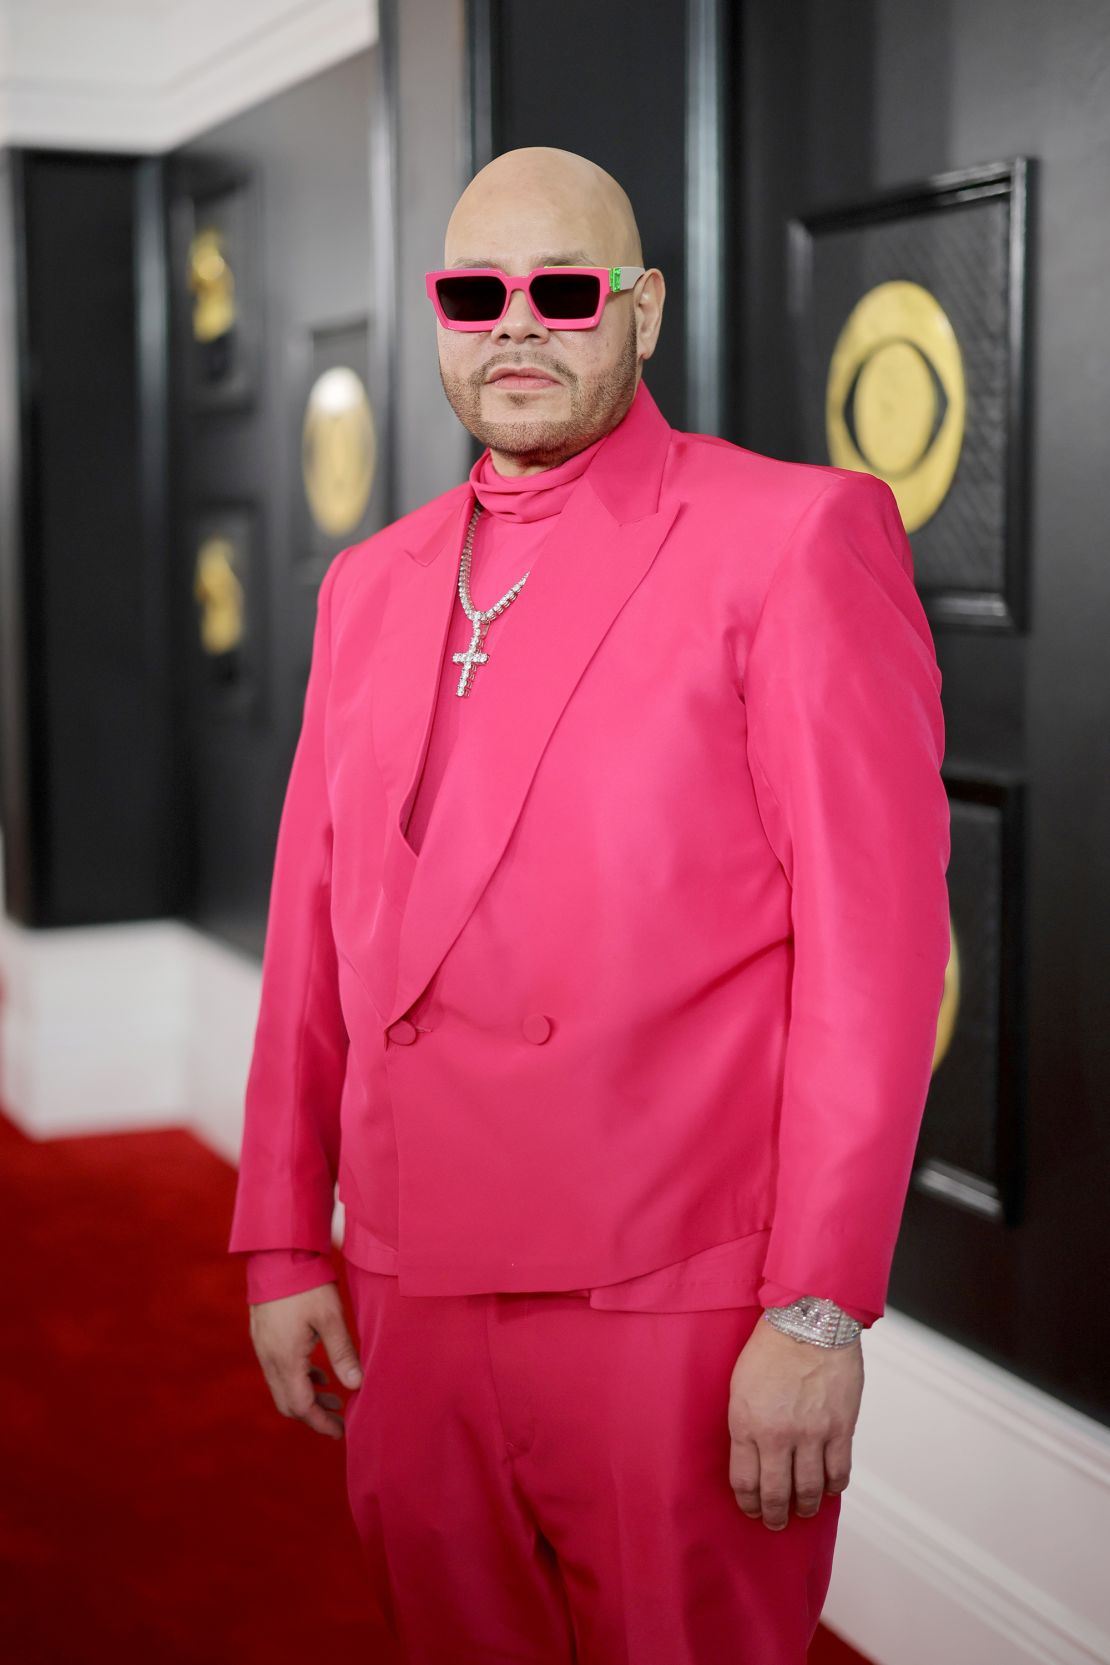 Fat Joe in a pink suit with matching shades.